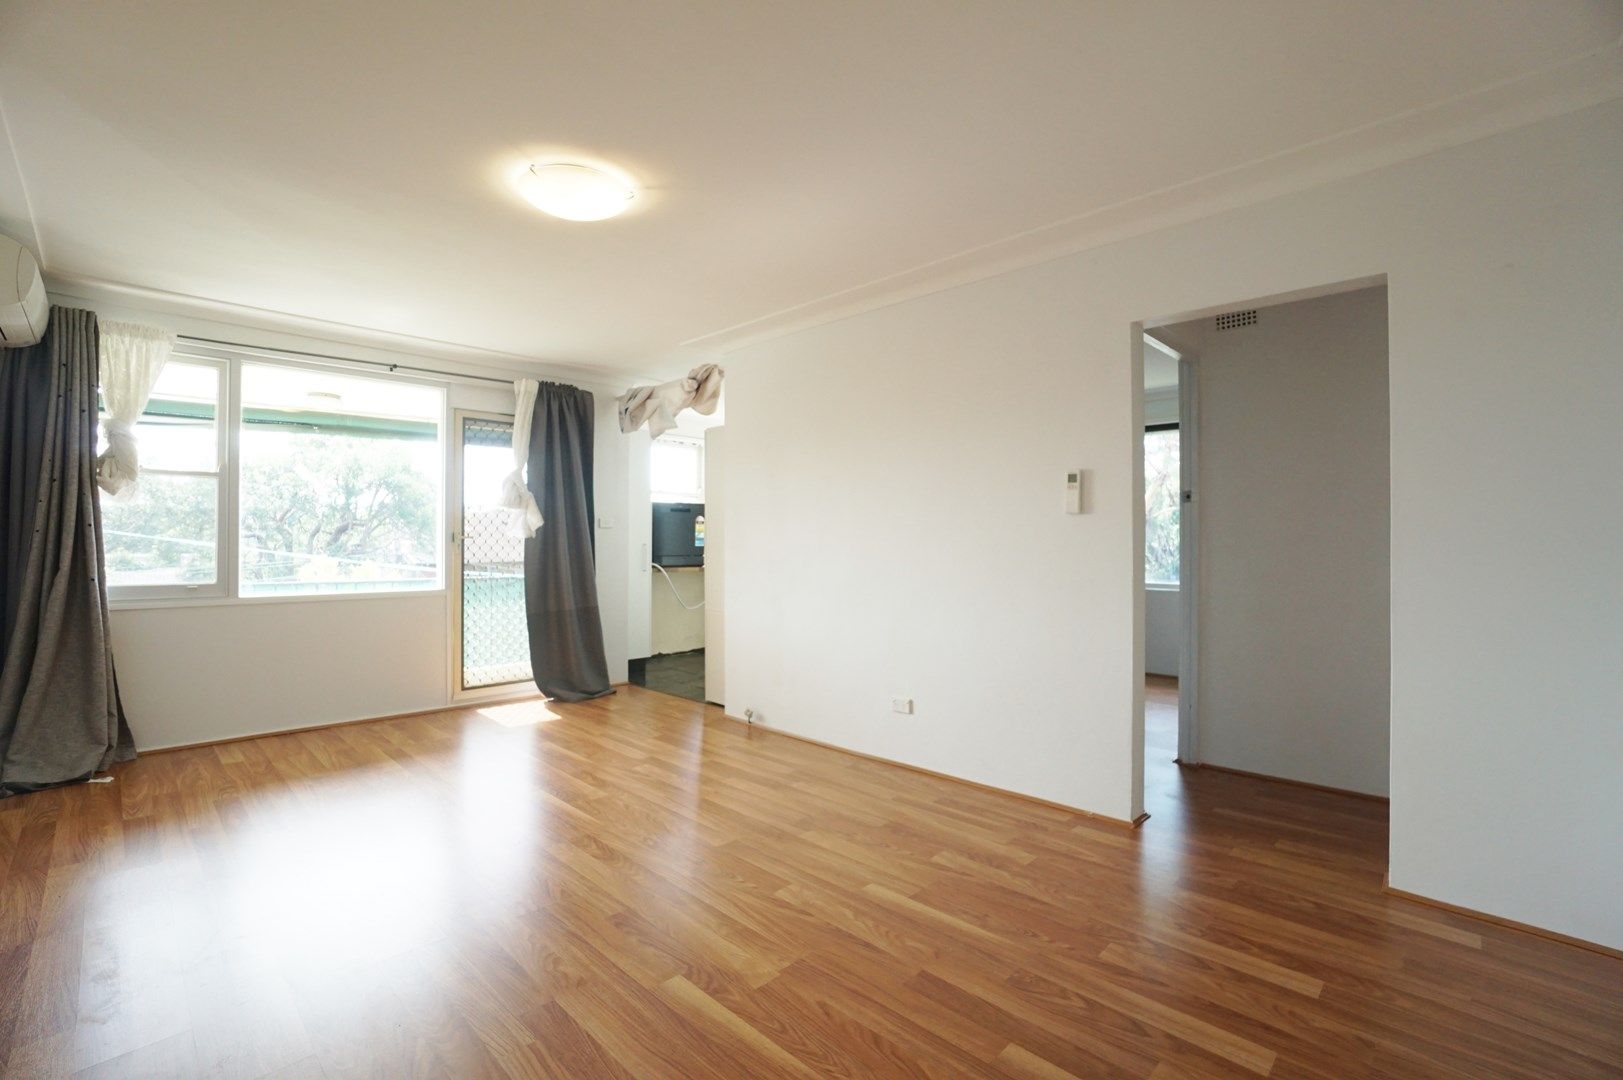 2 bedrooms Apartment / Unit / Flat in 9/6 Maxim Street WEST RYDE NSW, 2114